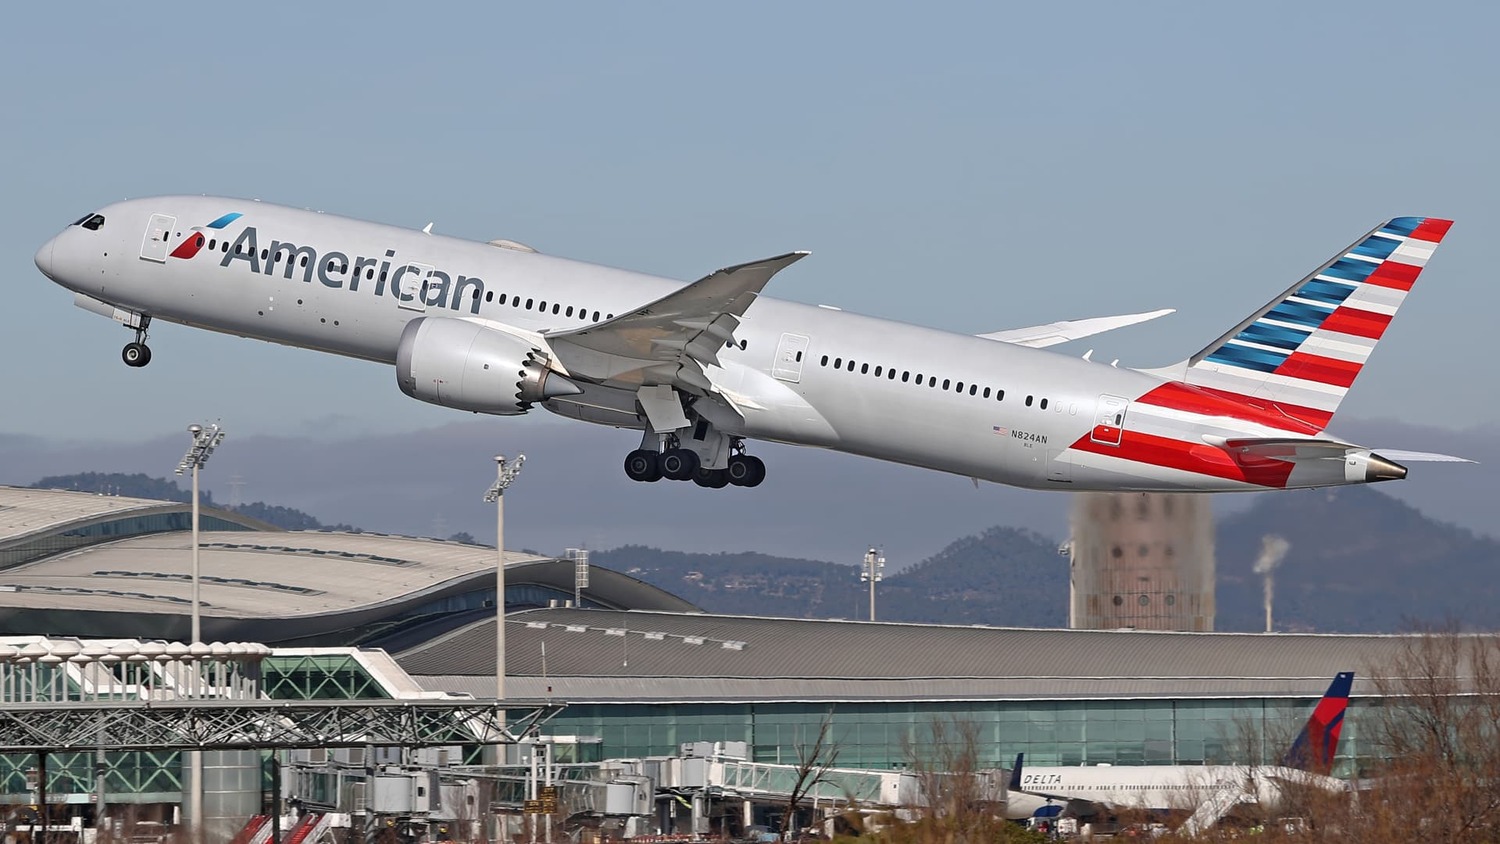 SWOT Analysis of American Airlines